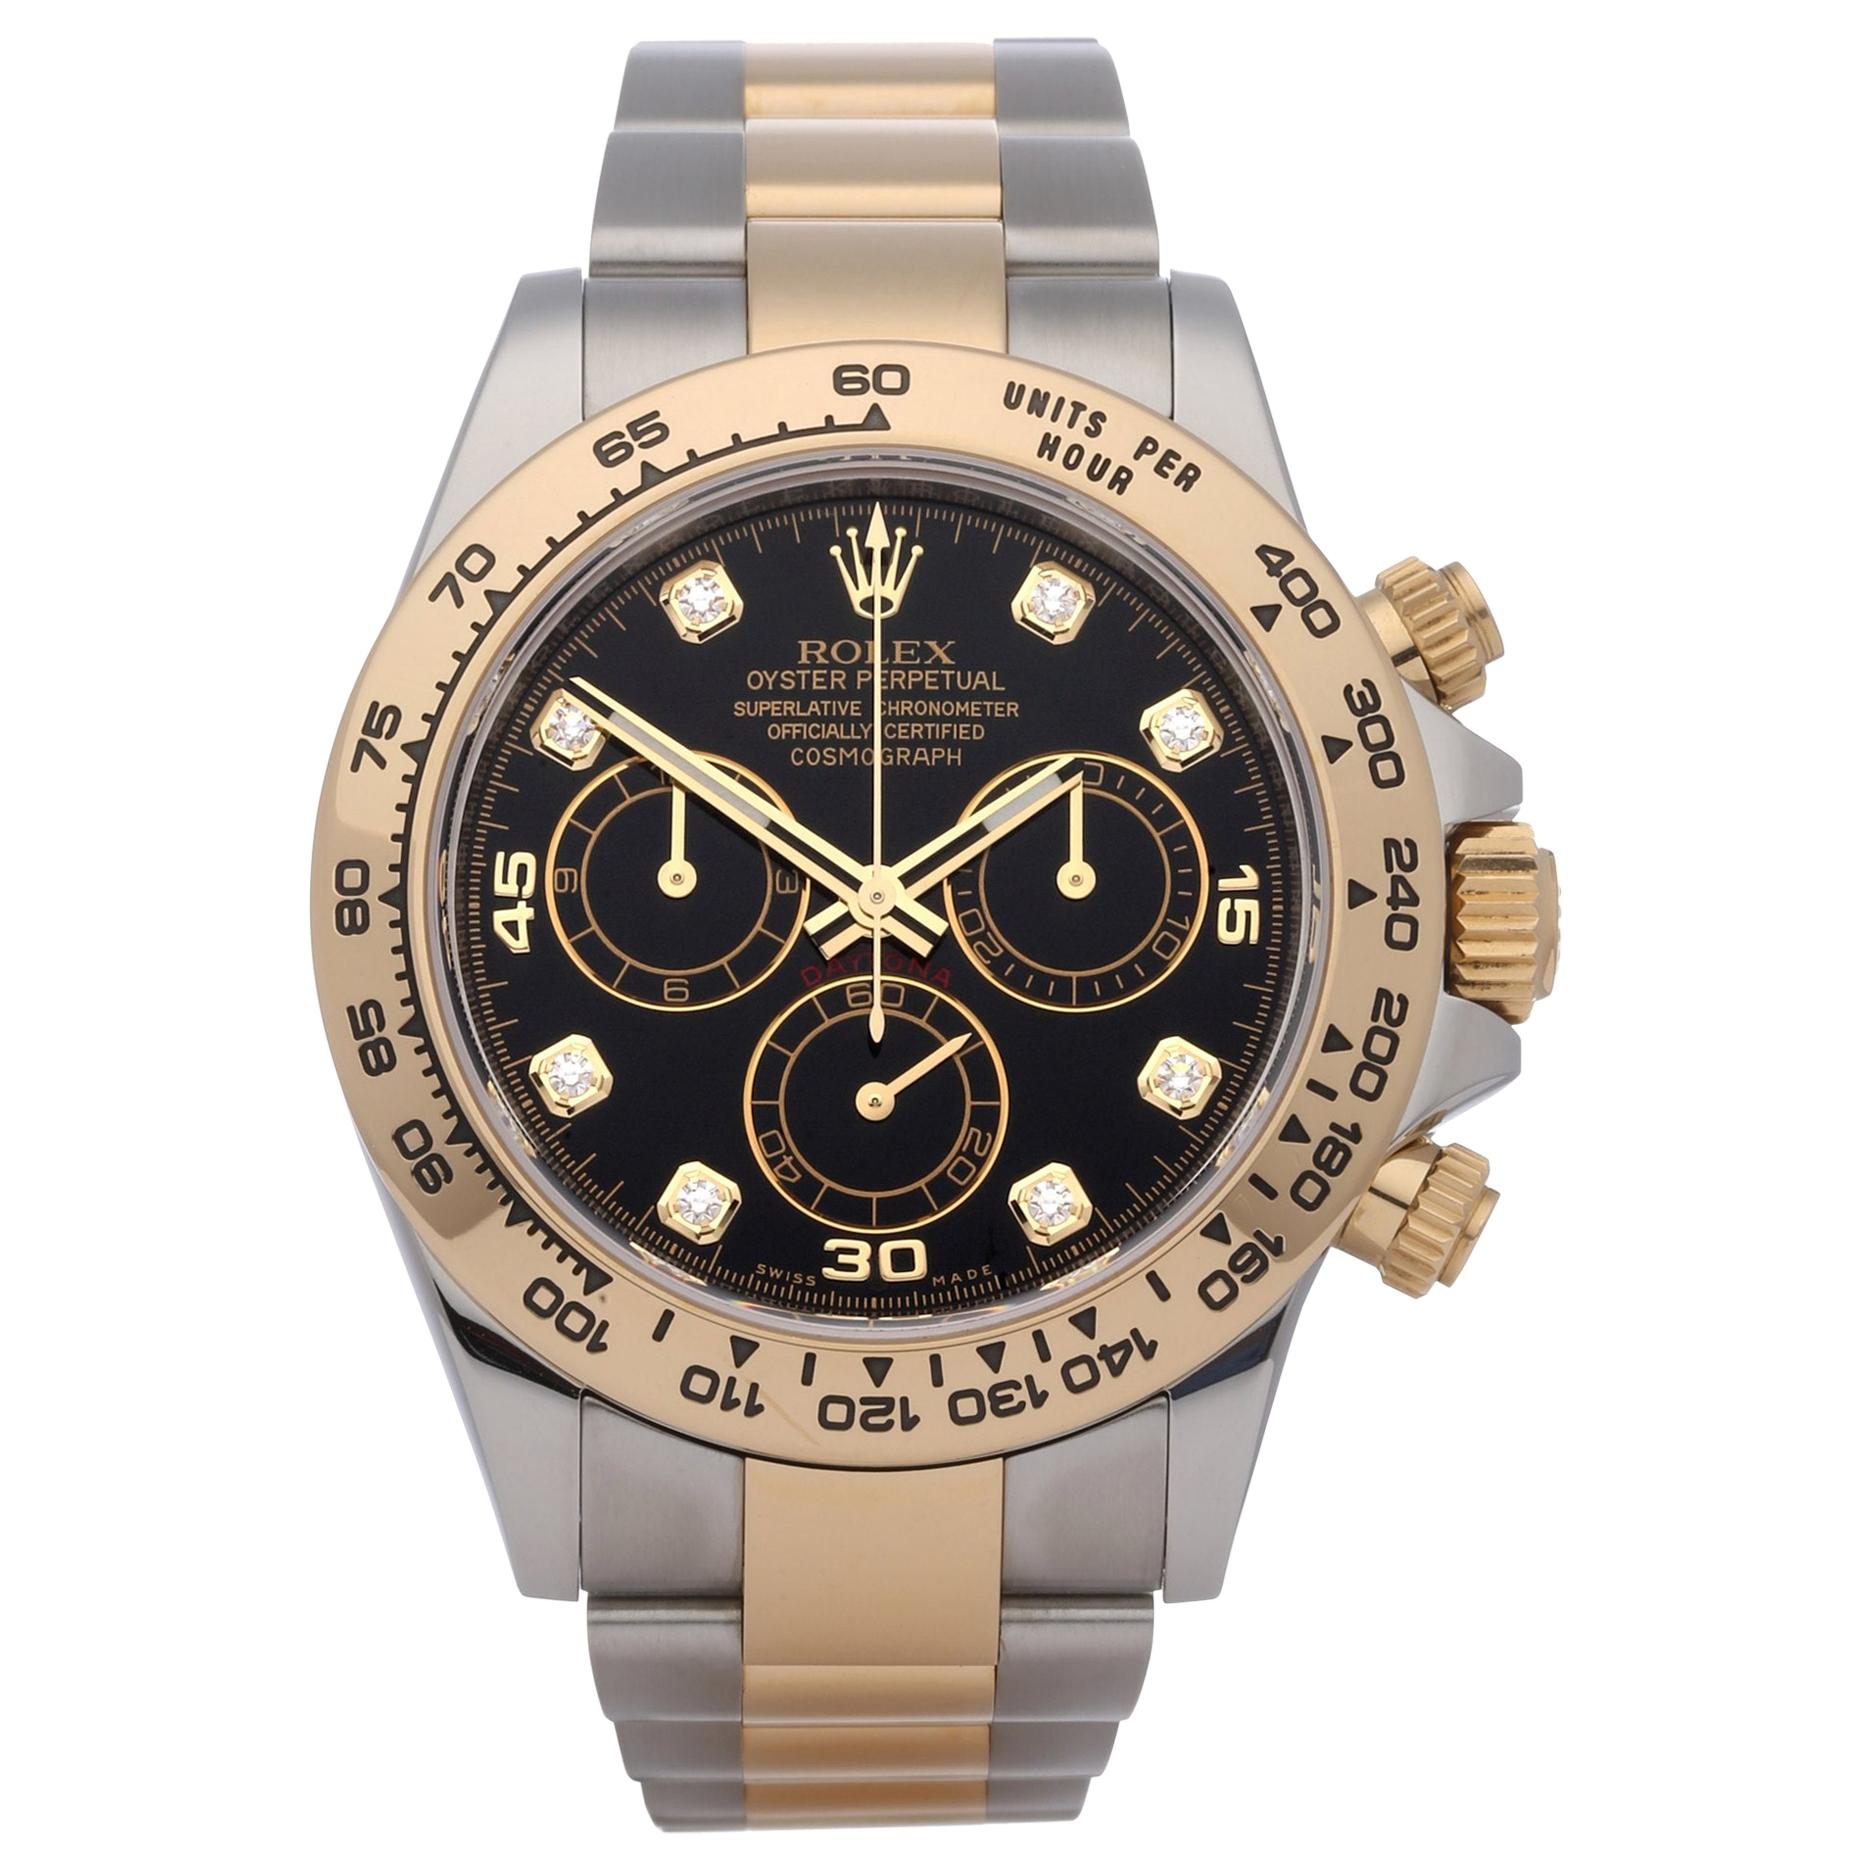 Rolex Daytona 116503 Men's Stainless Steel and Yellow Gold Cosmograph Watch